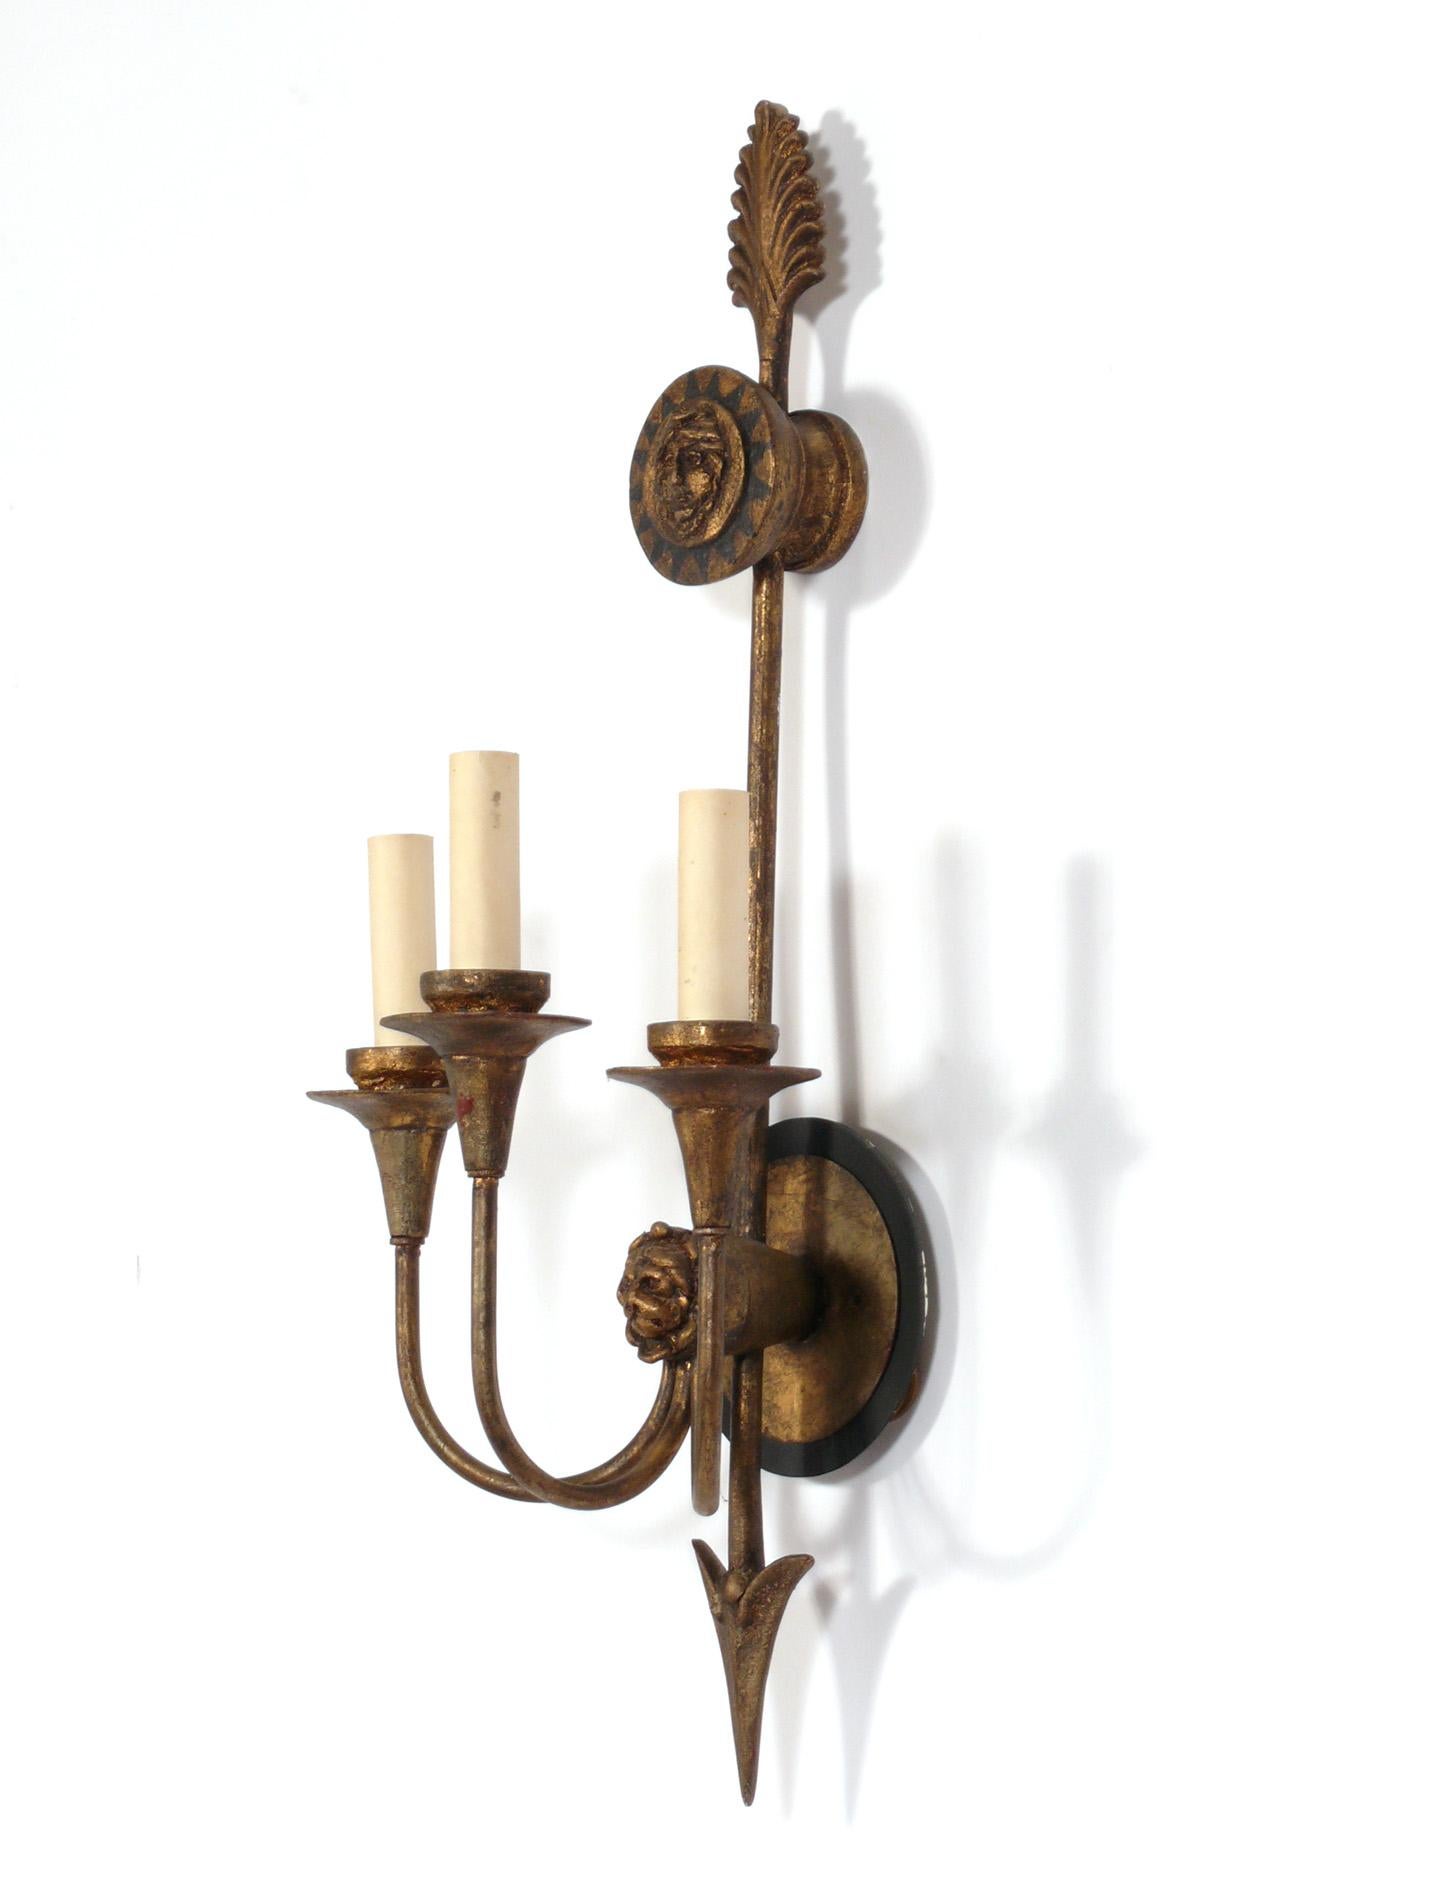 Pair of Elegant Sconces by Niermann Weeks, American, circa 2000s. They have been rewired and are ready to mount.